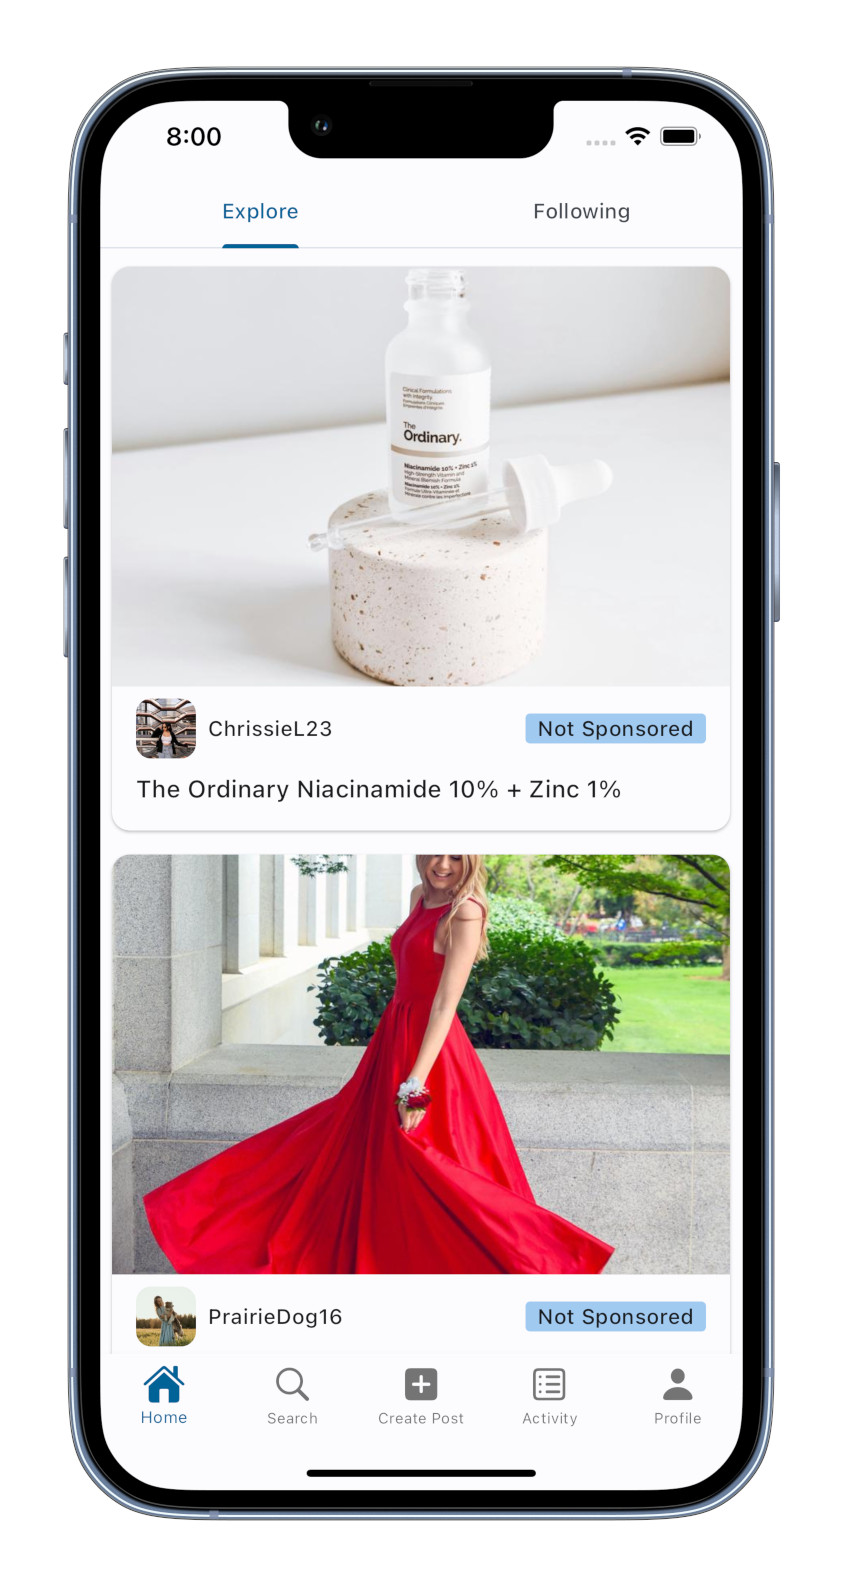 Screenshot of the Pikelane app explore feed page with 2 posts, a photo of a serum 'The Ordinary Niacinamide 10% + Zinc 1%', and a photo of a red evening dress with the title not visible.